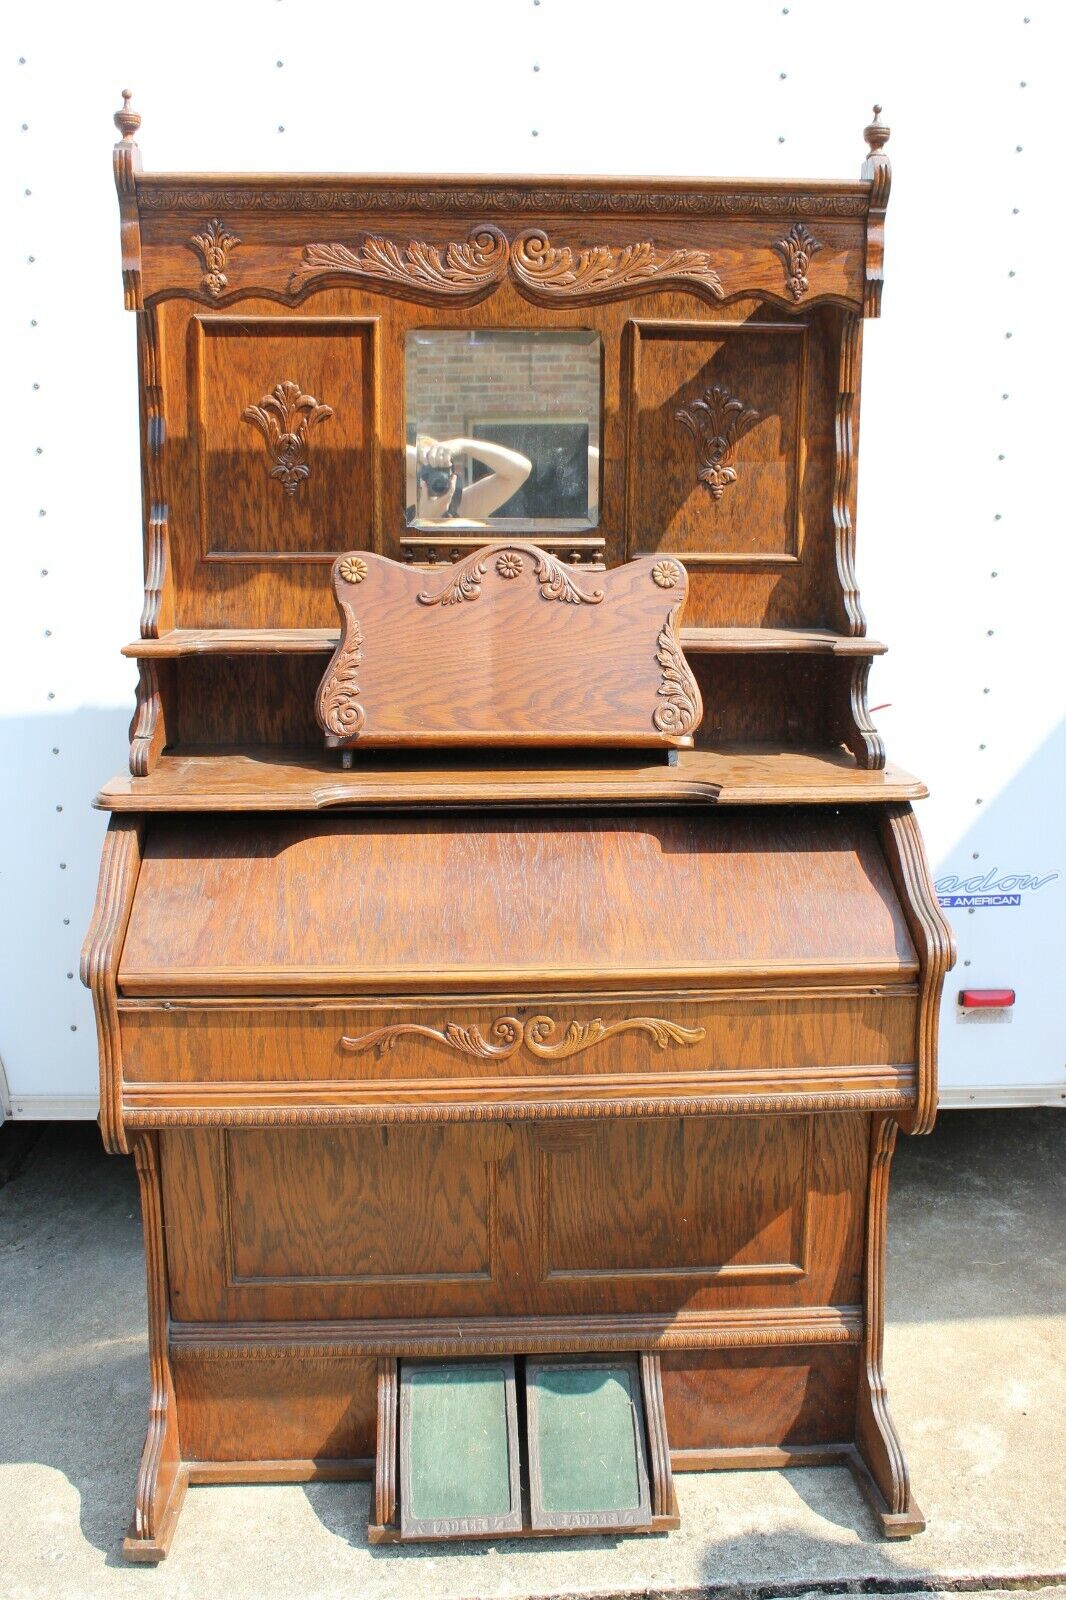 Antique Adler Pump Organ built prior to 1928 - two piece with beveled mirror